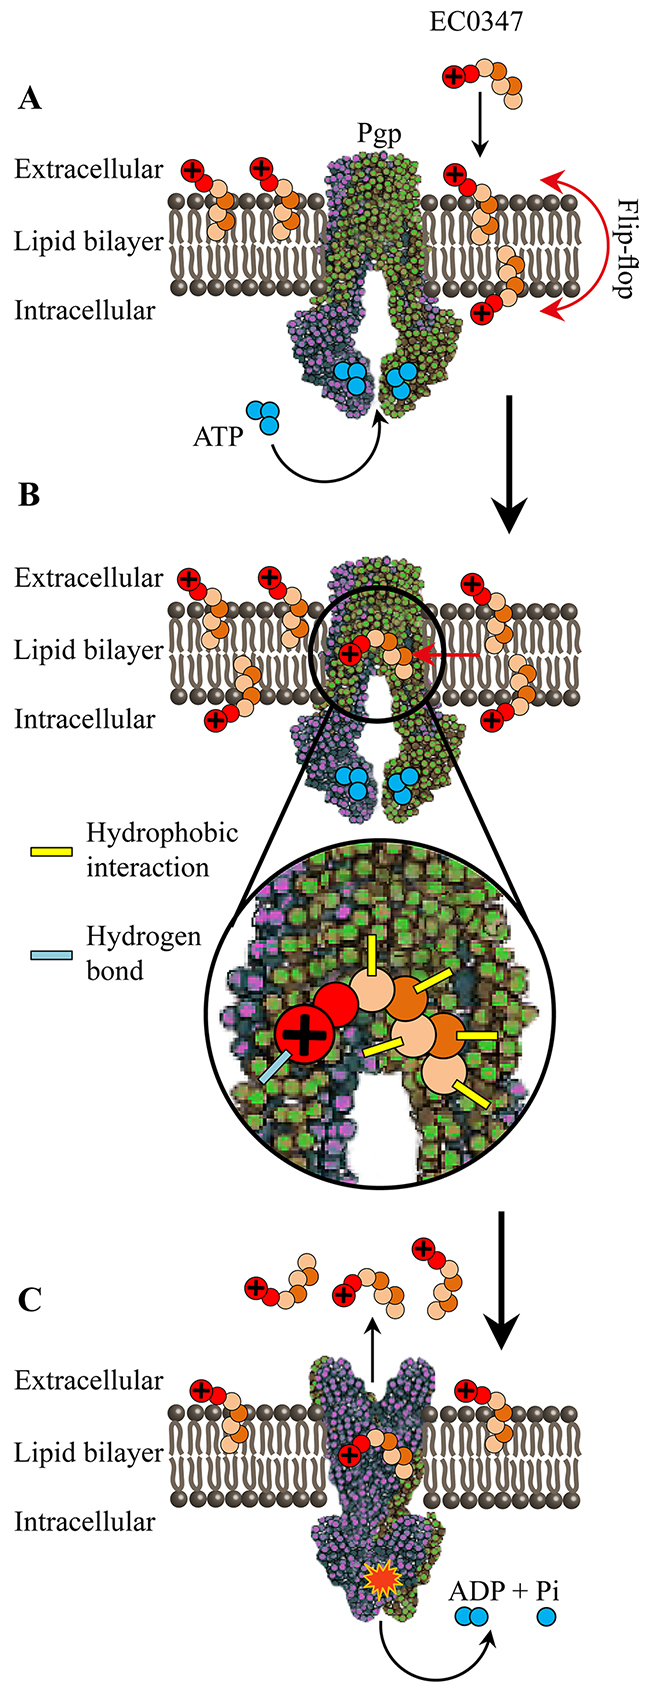 Proposed schematic model for the intercalation of EC0347 into the plasma membrane, its recognition in the lipid-bilayer by P-gp and its ATP-dependent extrusion by this MDR efflux pump.